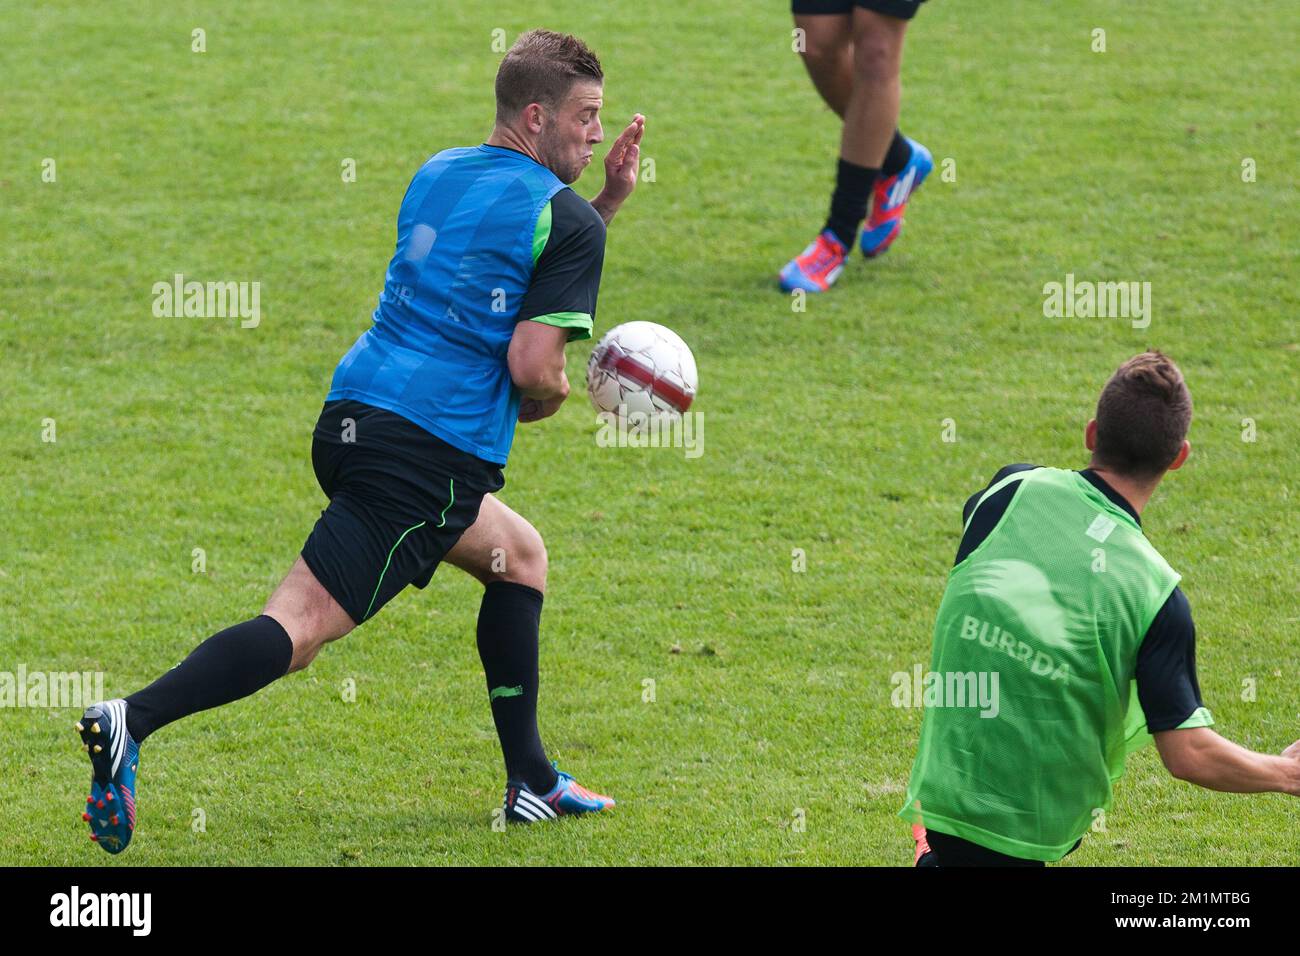 20120523 - ZAVENTEM, BELGIUM: Belgium's Toby Alderweireld pictured during a training session of the Red Devils, the Belgian national soccer team, in Zaventem, Wednesday 23 May 2012. The team is preparing for a friendly game against Montenegro later this week on 25 May. BELGA PHOTO BRUNO FAHY Stock Photo